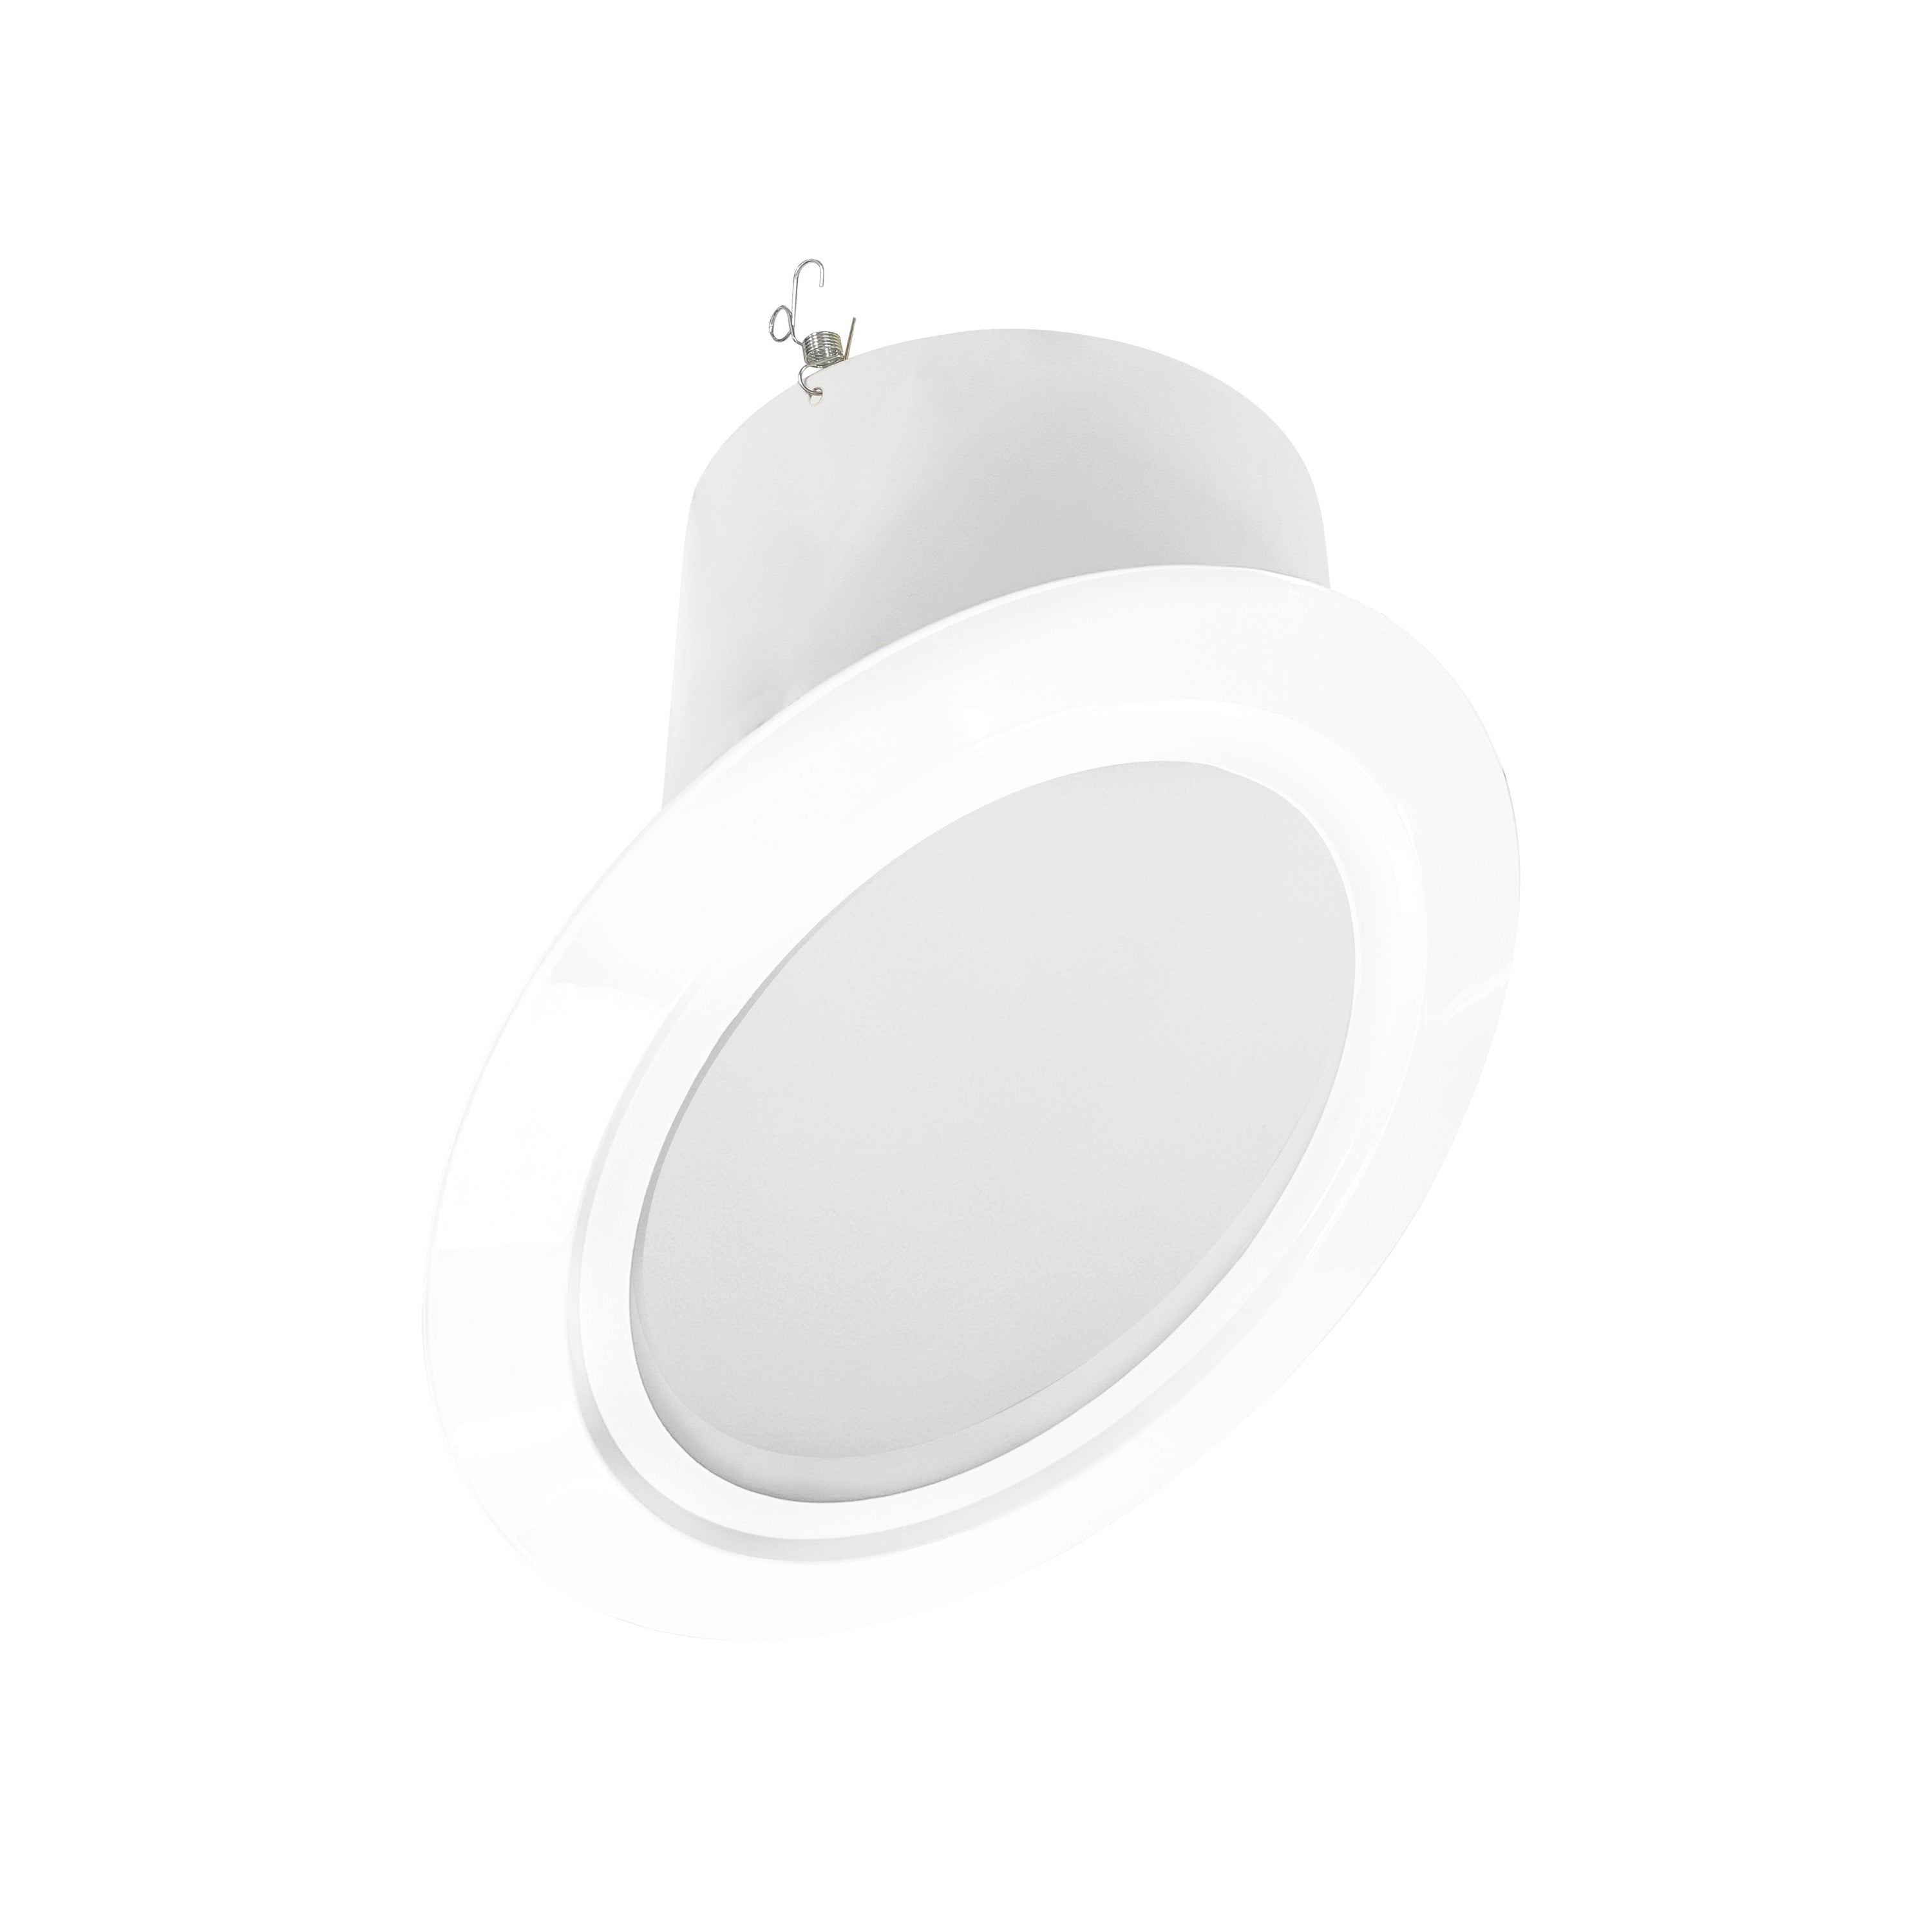 Nora Lighting NTM-616/45W - Recessed - 6 Inch Super Sloped Reflector Trim, White Reflector / White Flange